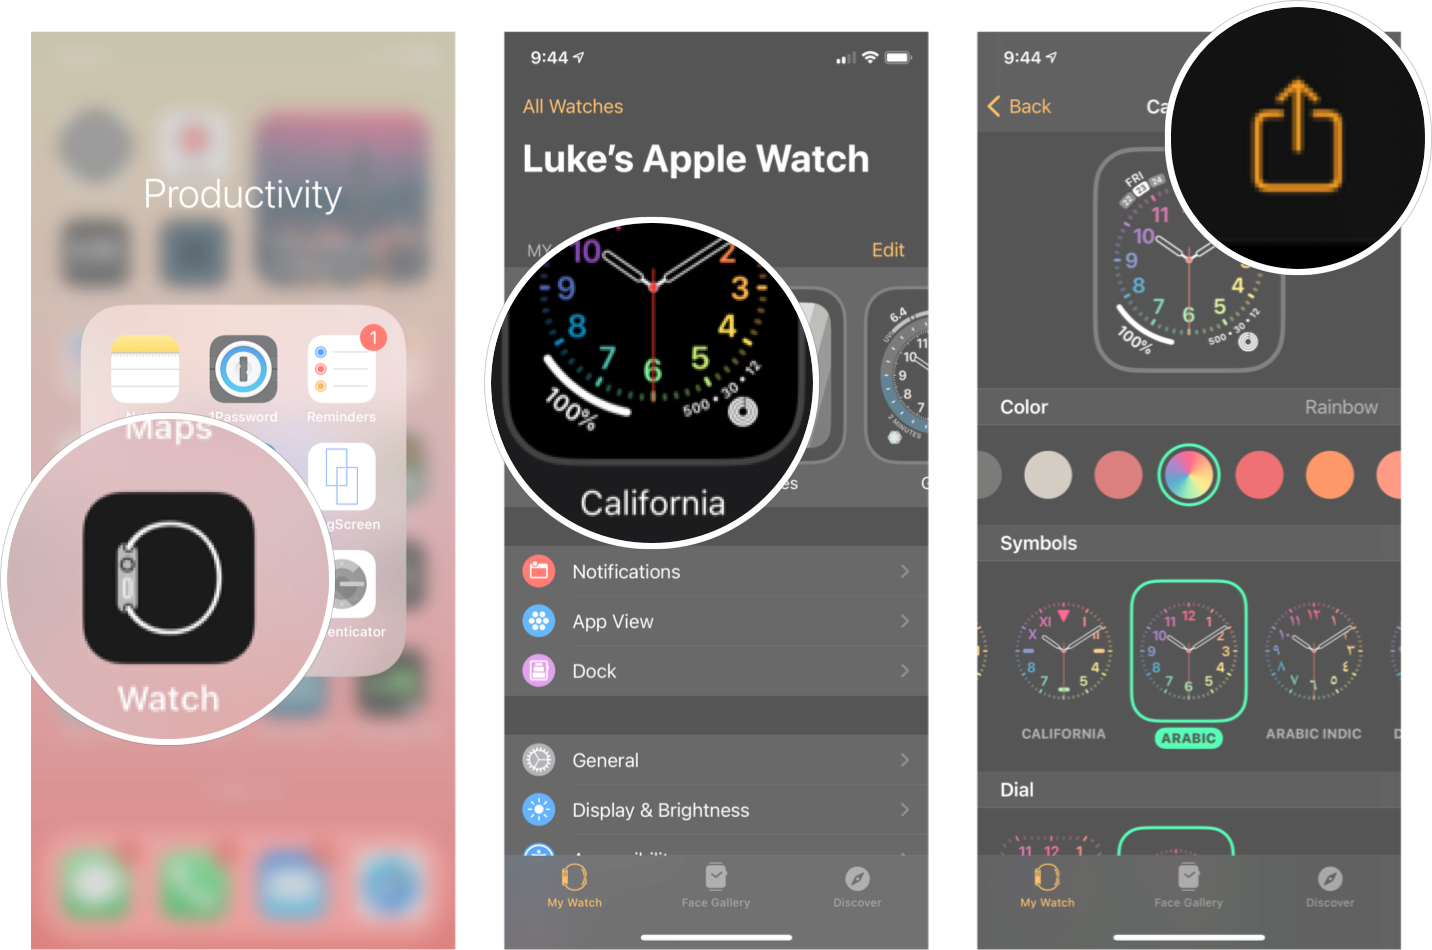 Share A Watch Face On iPhone: Launch the watch app on your iPhone, tap the watch face you want to share, and then tap the share button.